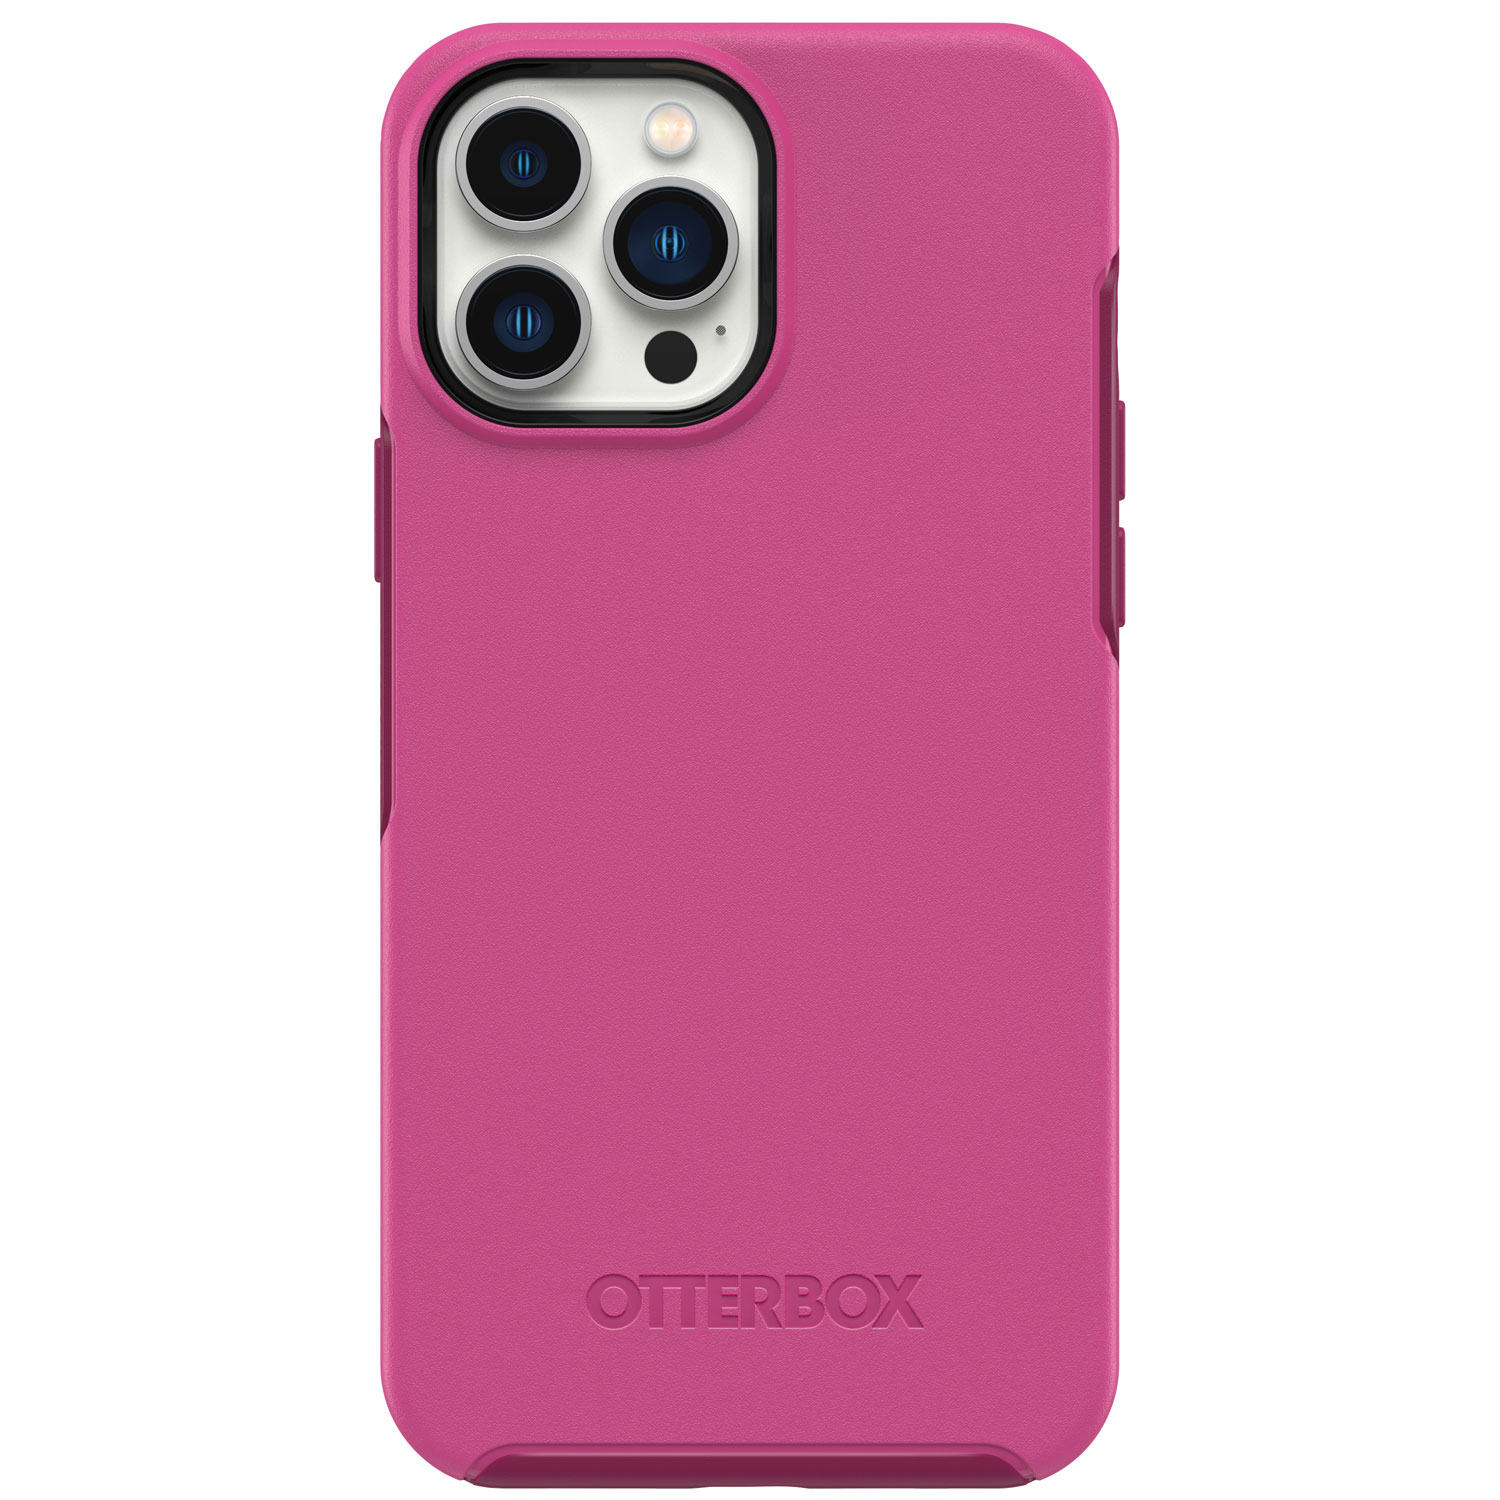 OtterBox Symmetry Fitted Hard Shell Case for iPhone 13 Pro Max/12 Pro Max - Pink